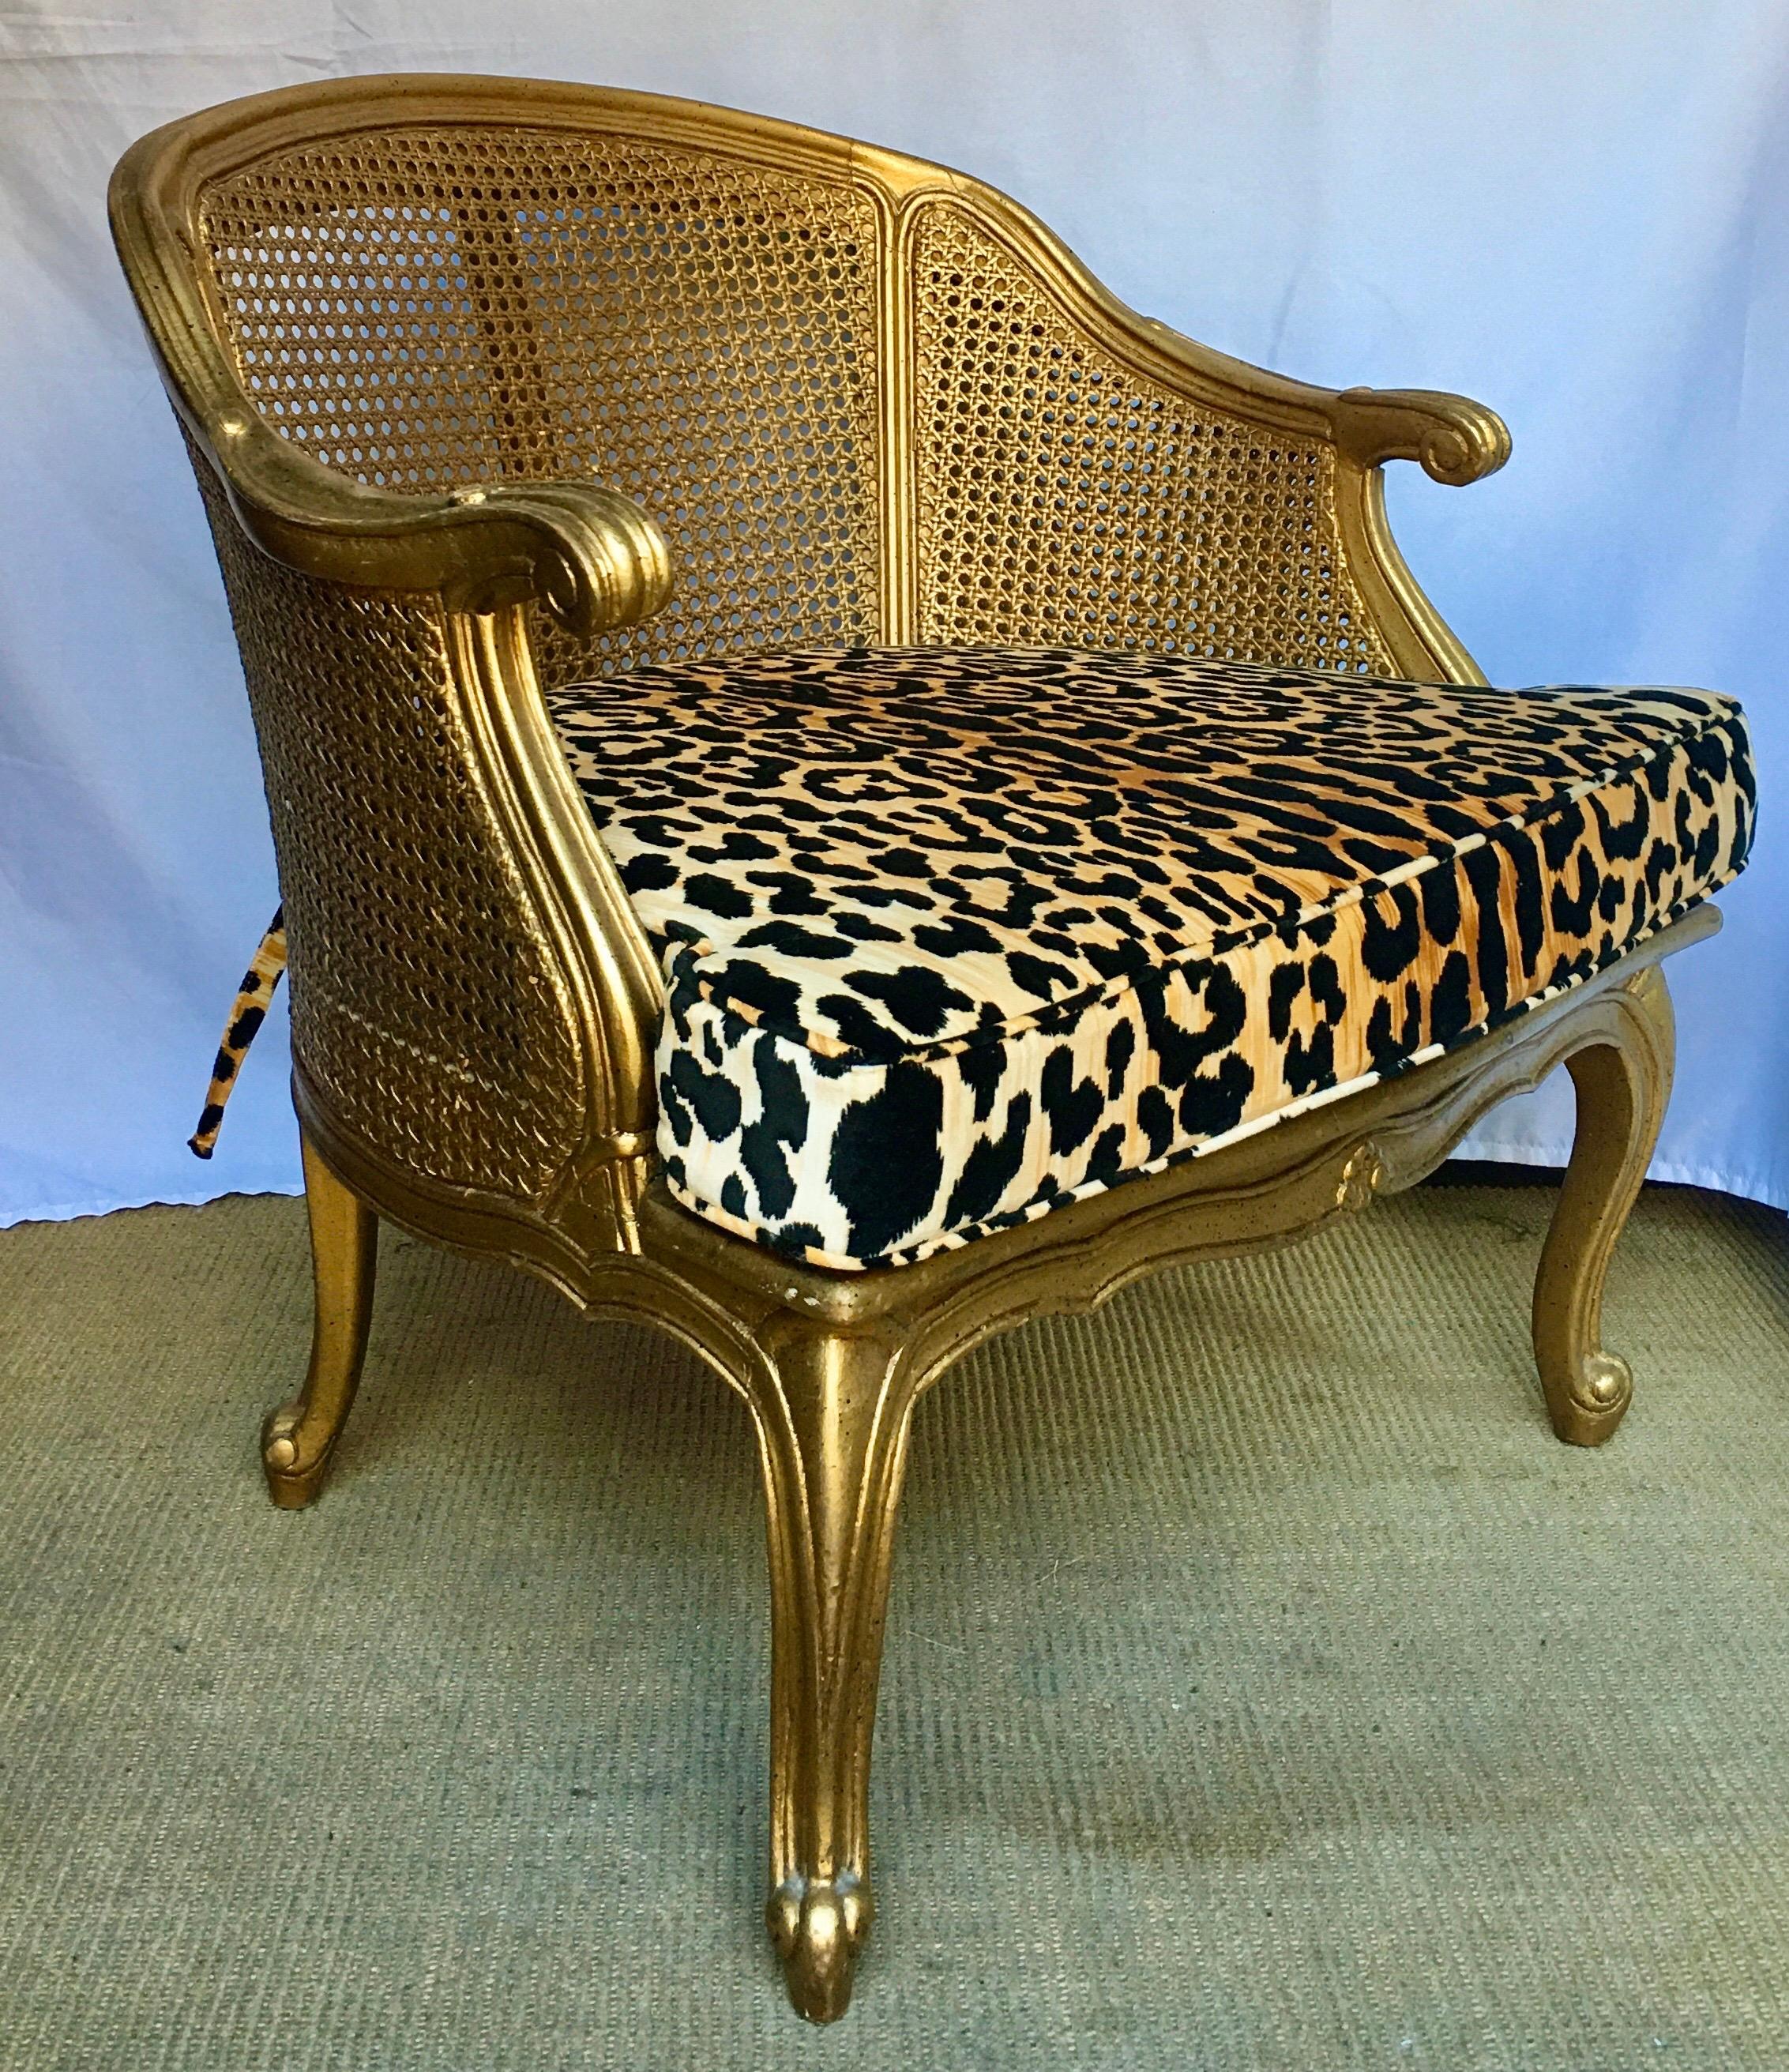 Hollywood Regency style arm accent chair with gilt painted frame, curved cabriolet legs, and cane back/sides. Back and sides of chair are double caned. New custom seat cushion upholstered in a leopard animal print velvet. Chair labeled 